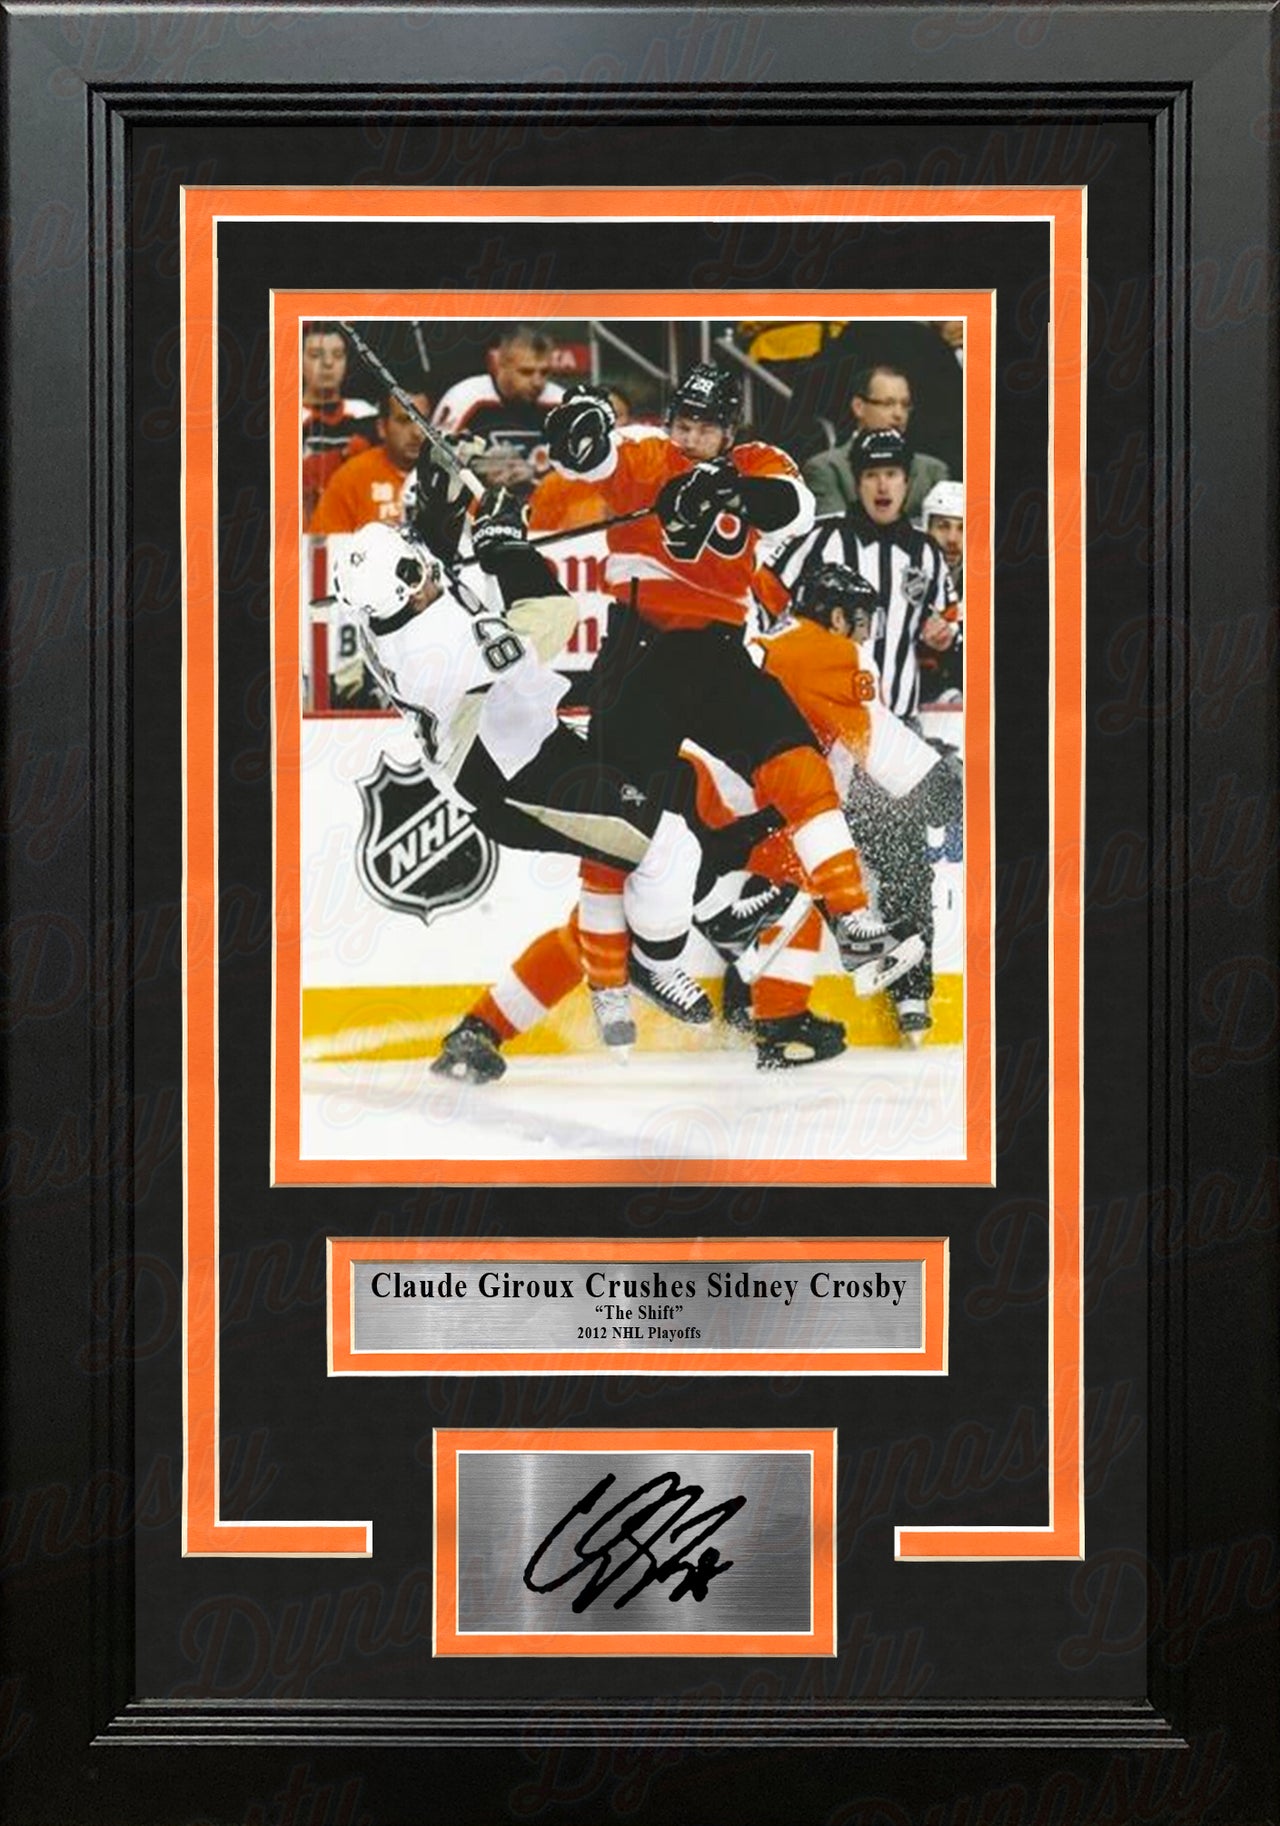 Claude Giroux Hits Sidney Crosby Philadelphia Flyers Playoffs Framed Photo with Engraved Autograph - Dynasty Sports & Framing 